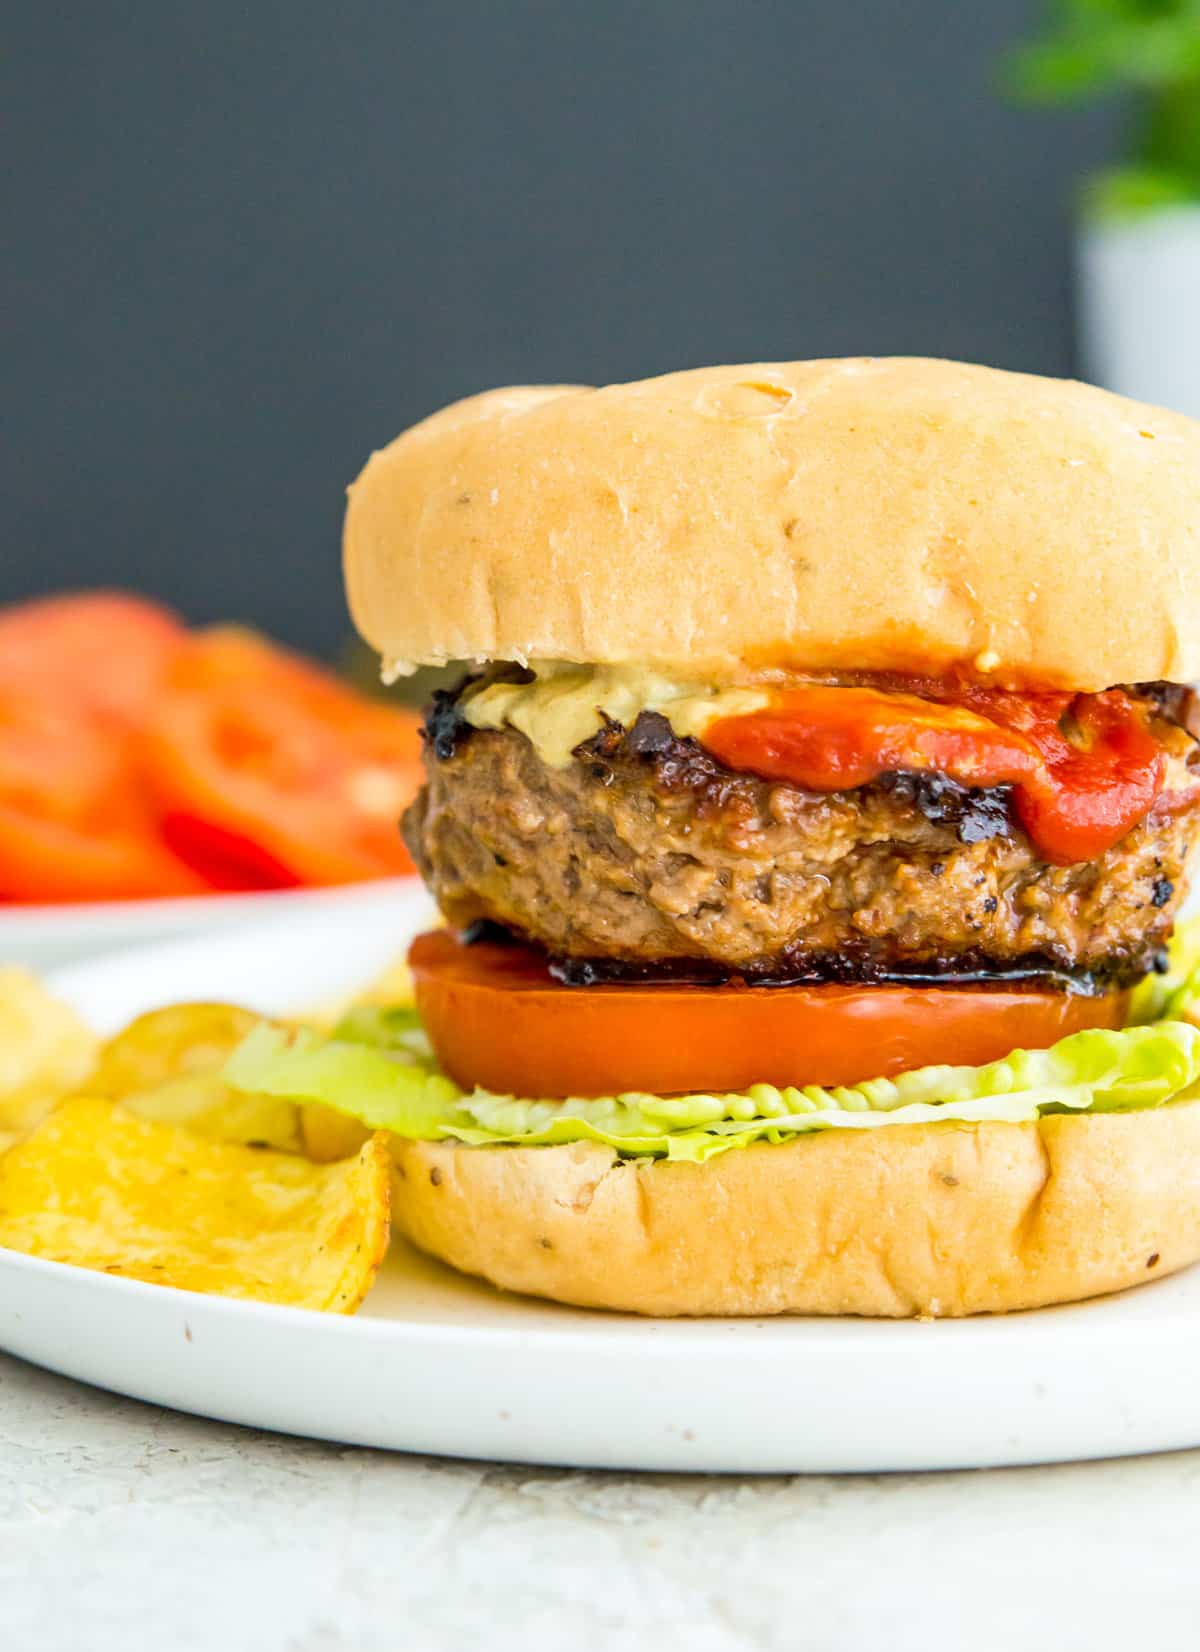 A gluten free burger on a bun topped with lettuce and tomato.